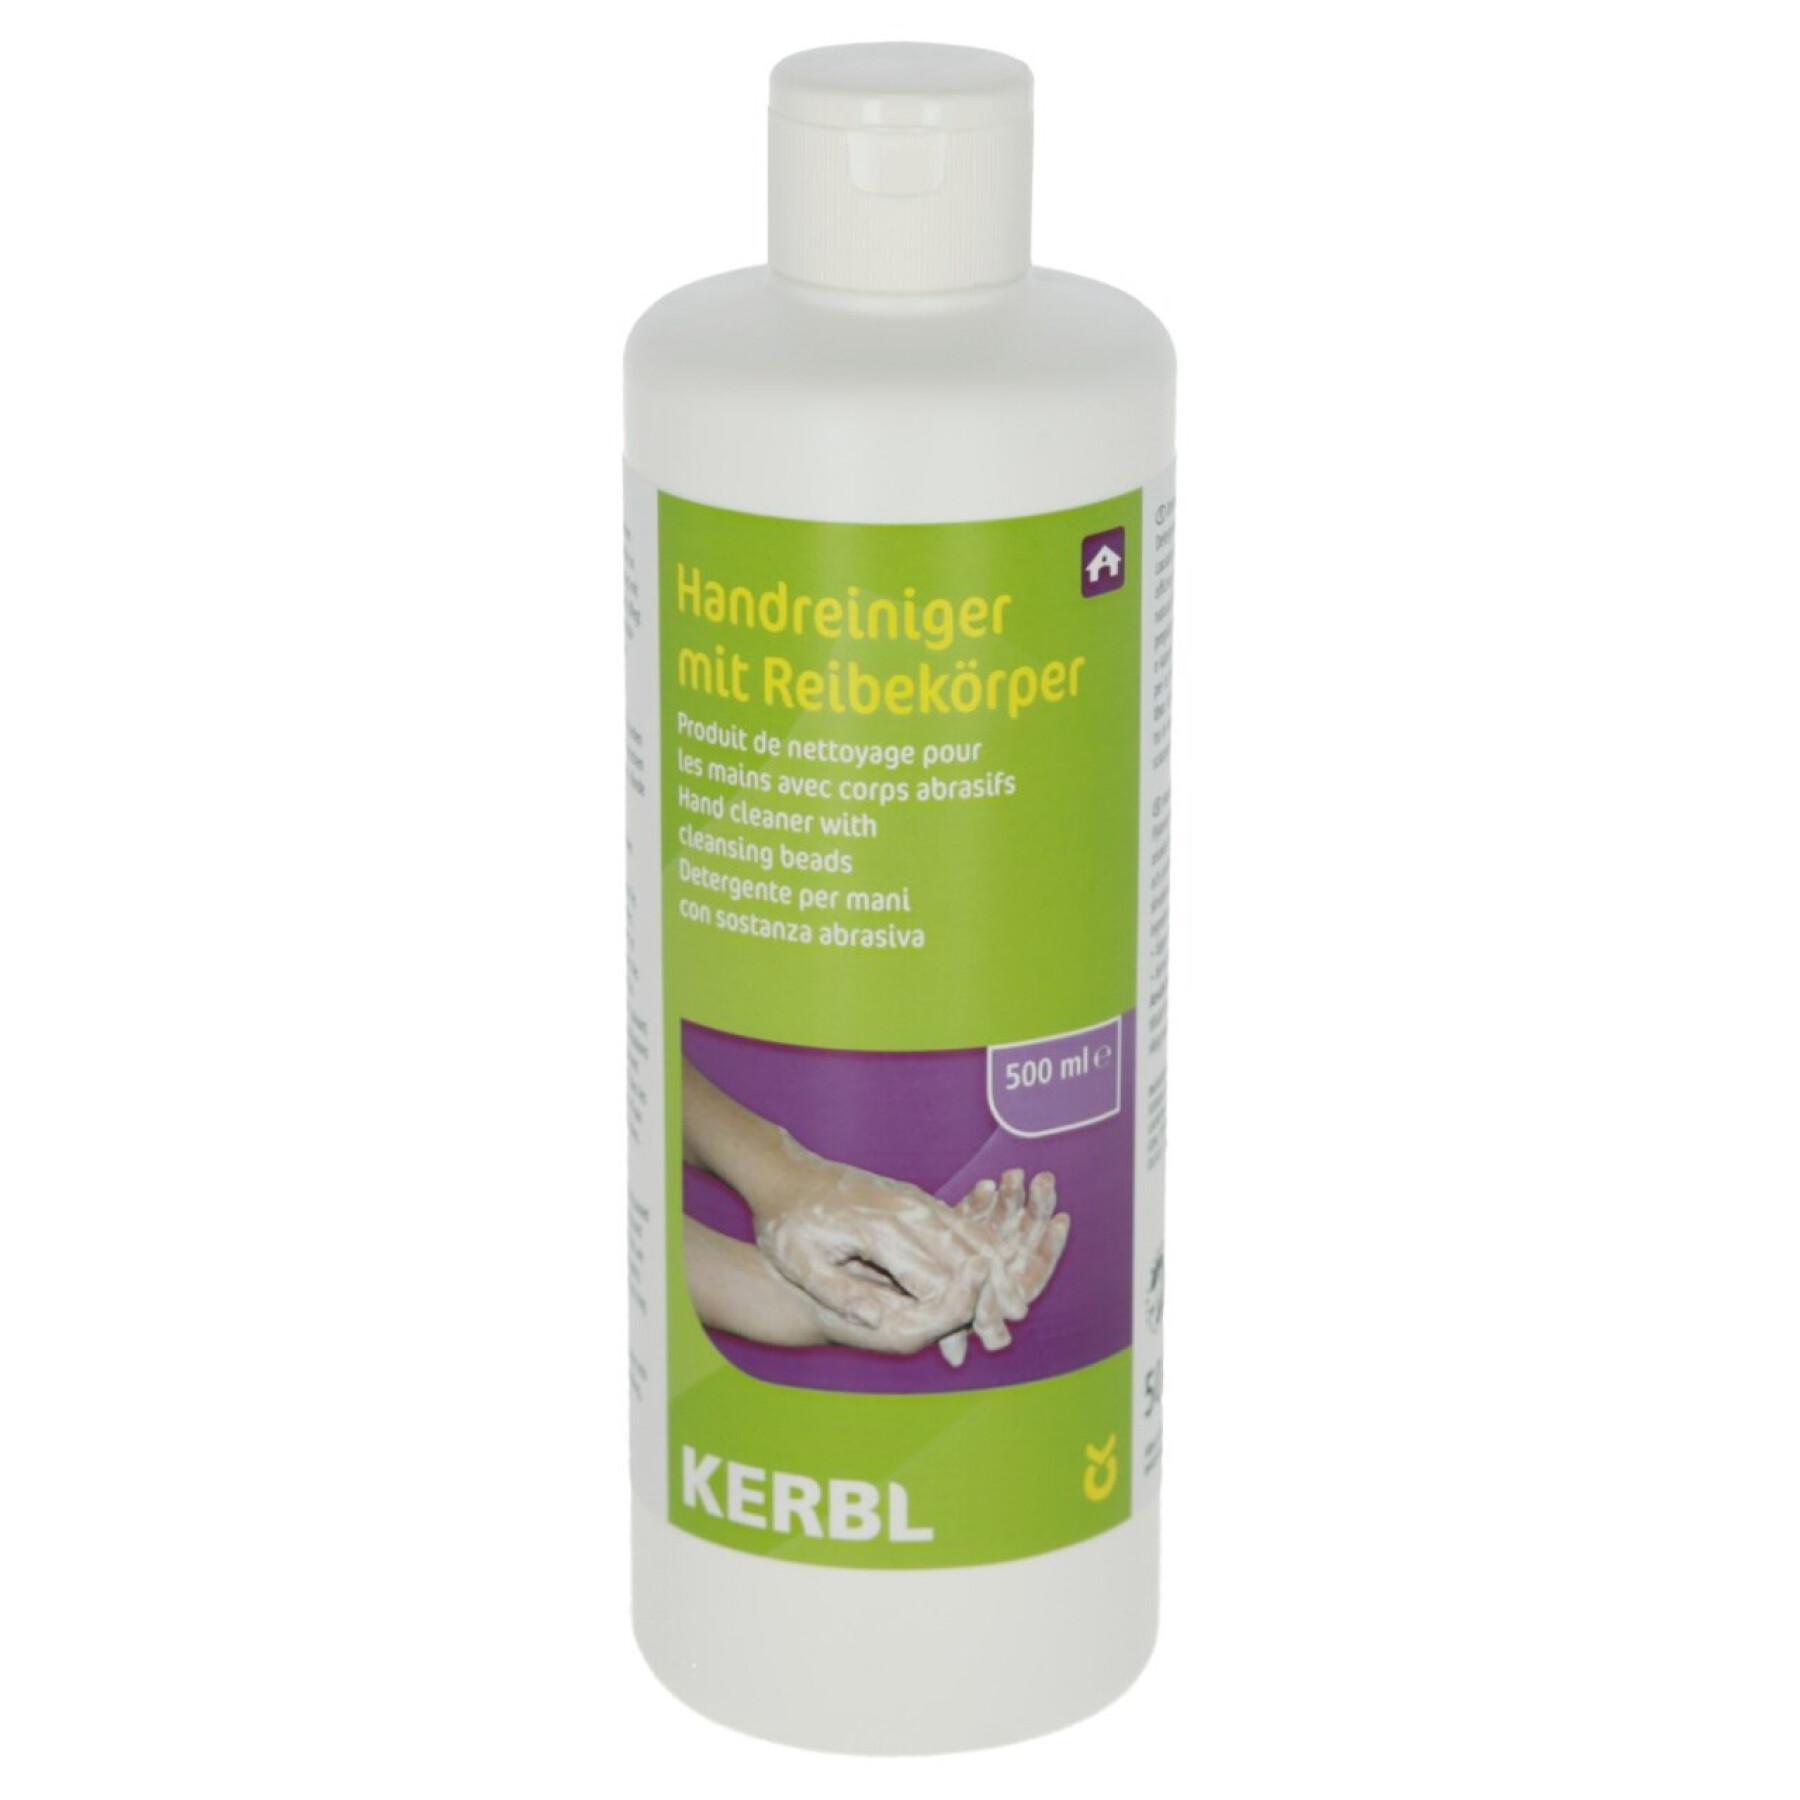 Hand cleaning soap with abrasive particles Kerbl